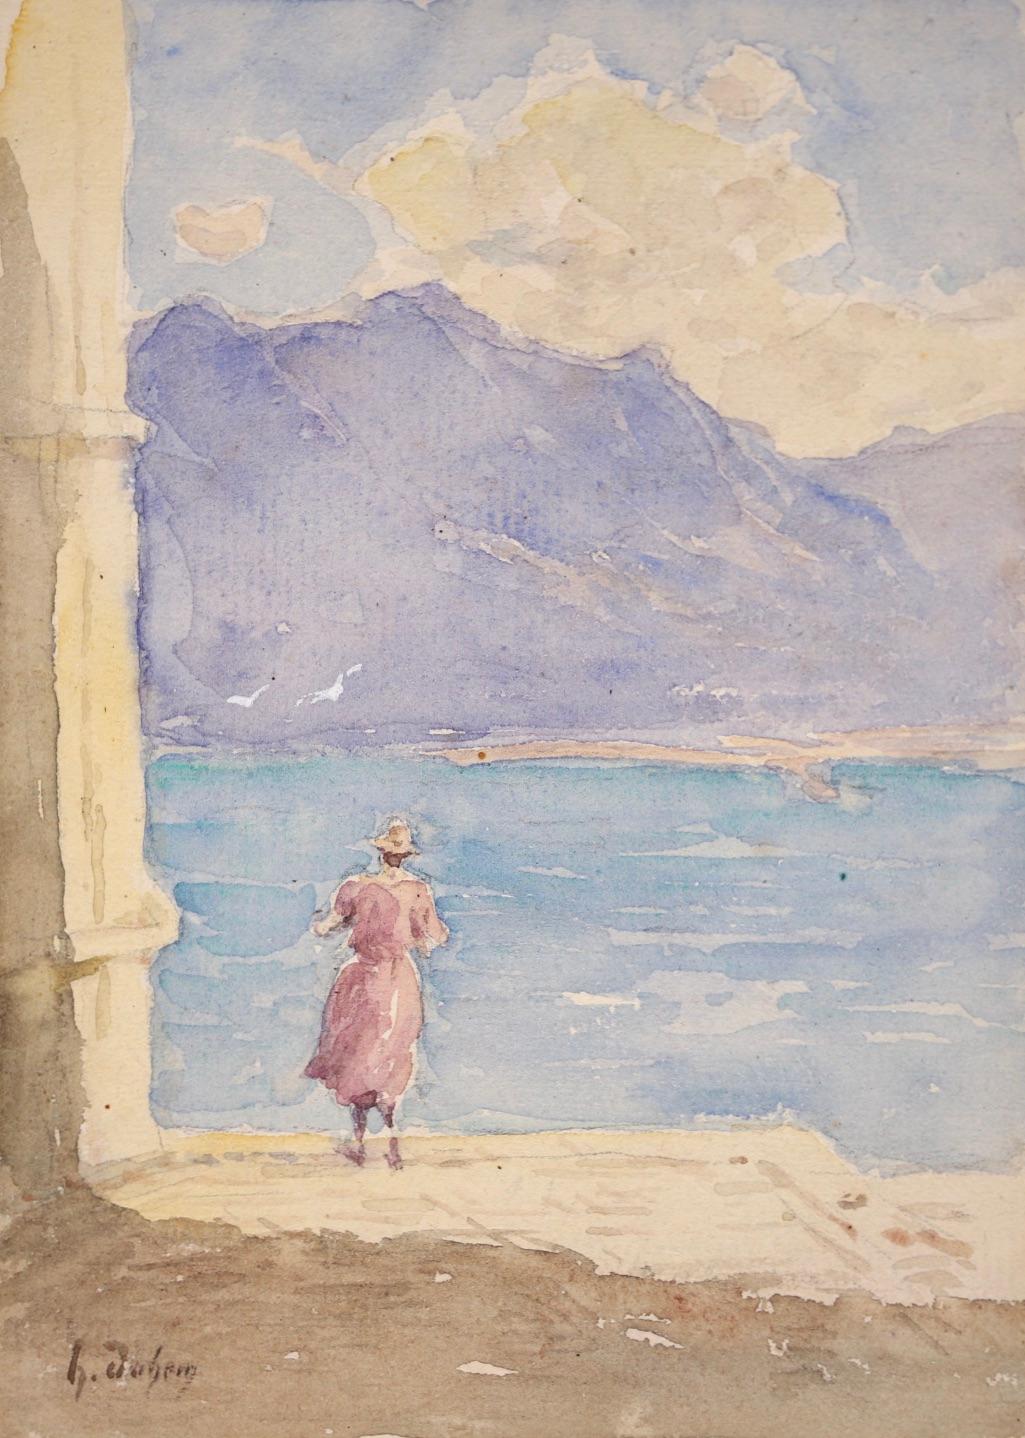 A beautiful and delicate watercolour on paper circa 1920 by French impressionist painter Henri Duhem. The work depicts a woman in a pink dress and sun hat looking out of blue water of Lac Leman (Lake Geneva) in Switzerland and the mountain